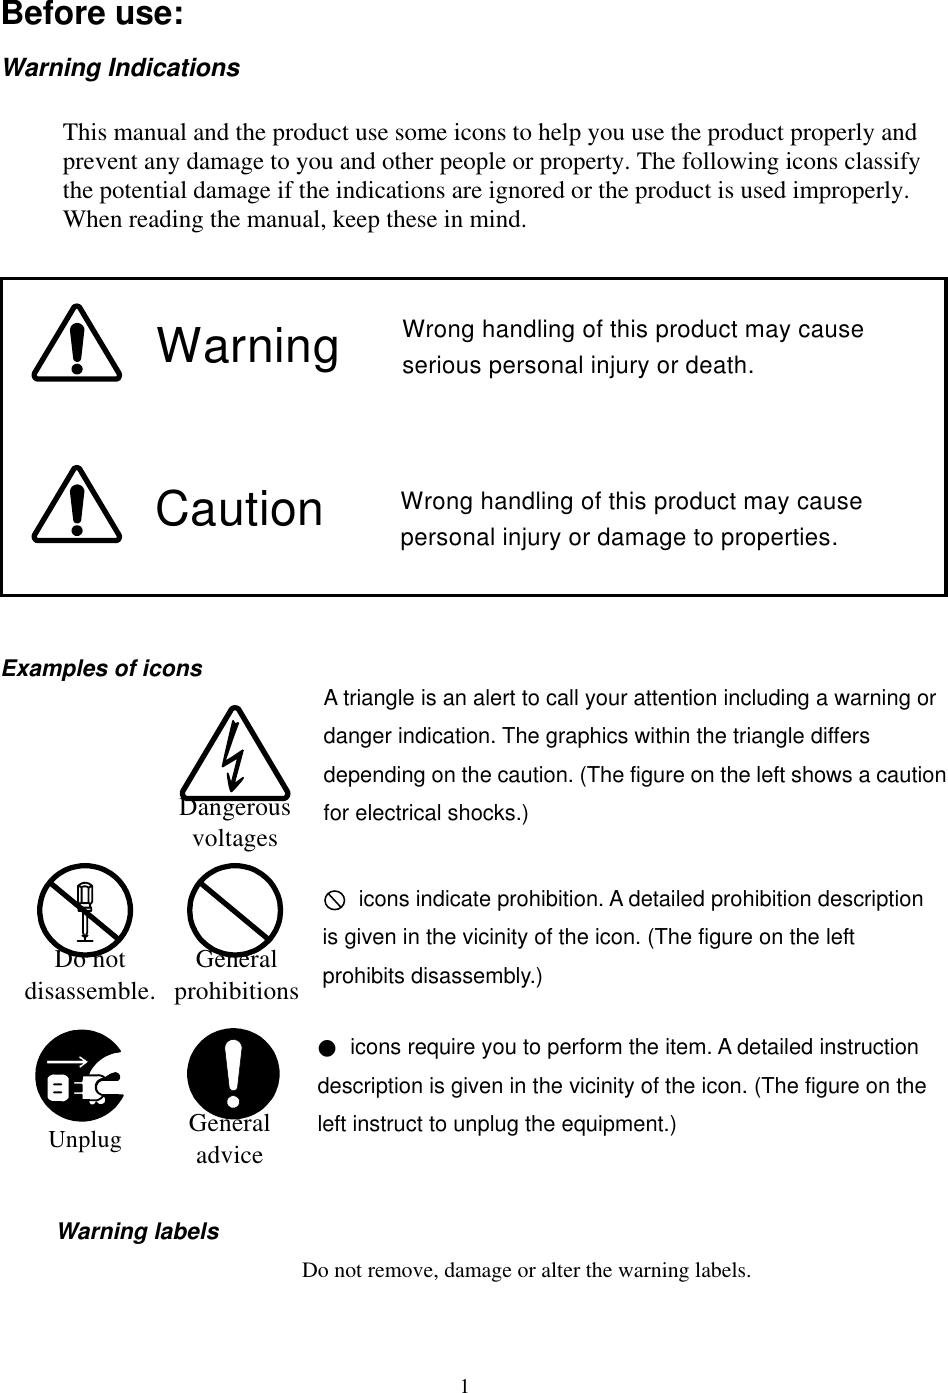   1  Before use: Warning Indications This manual and the product use some icons to help you use the product properly and prevent any damage to you and other people or property. The following icons classify the potential damage if the indications are ignored or the product is used improperly. When reading the manual, keep these in mind. Wrong handling of this product may cause serious personal injury or death.Wrong handling of this product may cause personal injury or damage to properties.WarningCaution Examples of icons          icons indicate prohibition. A detailed prohibition description is given in the vicinity of the icon. (The figure on the left prohibits disassembly.)        Warning labels Do not remove, damage or alter the warning labels.Dangerous voltagesGeneral prohibitionsDo not disassemble.General adviceUnplug  A triangle is an alert to call your attention including a warning or danger indication. The graphics within the triangle differs depending on the caution. (The figure on the left shows a caution for electrical shocks.) ●  icons require you to perform the item. A detailed instruction description is given in the vicinity of the icon. (The figure on the left instruct to unplug the equipment.) 